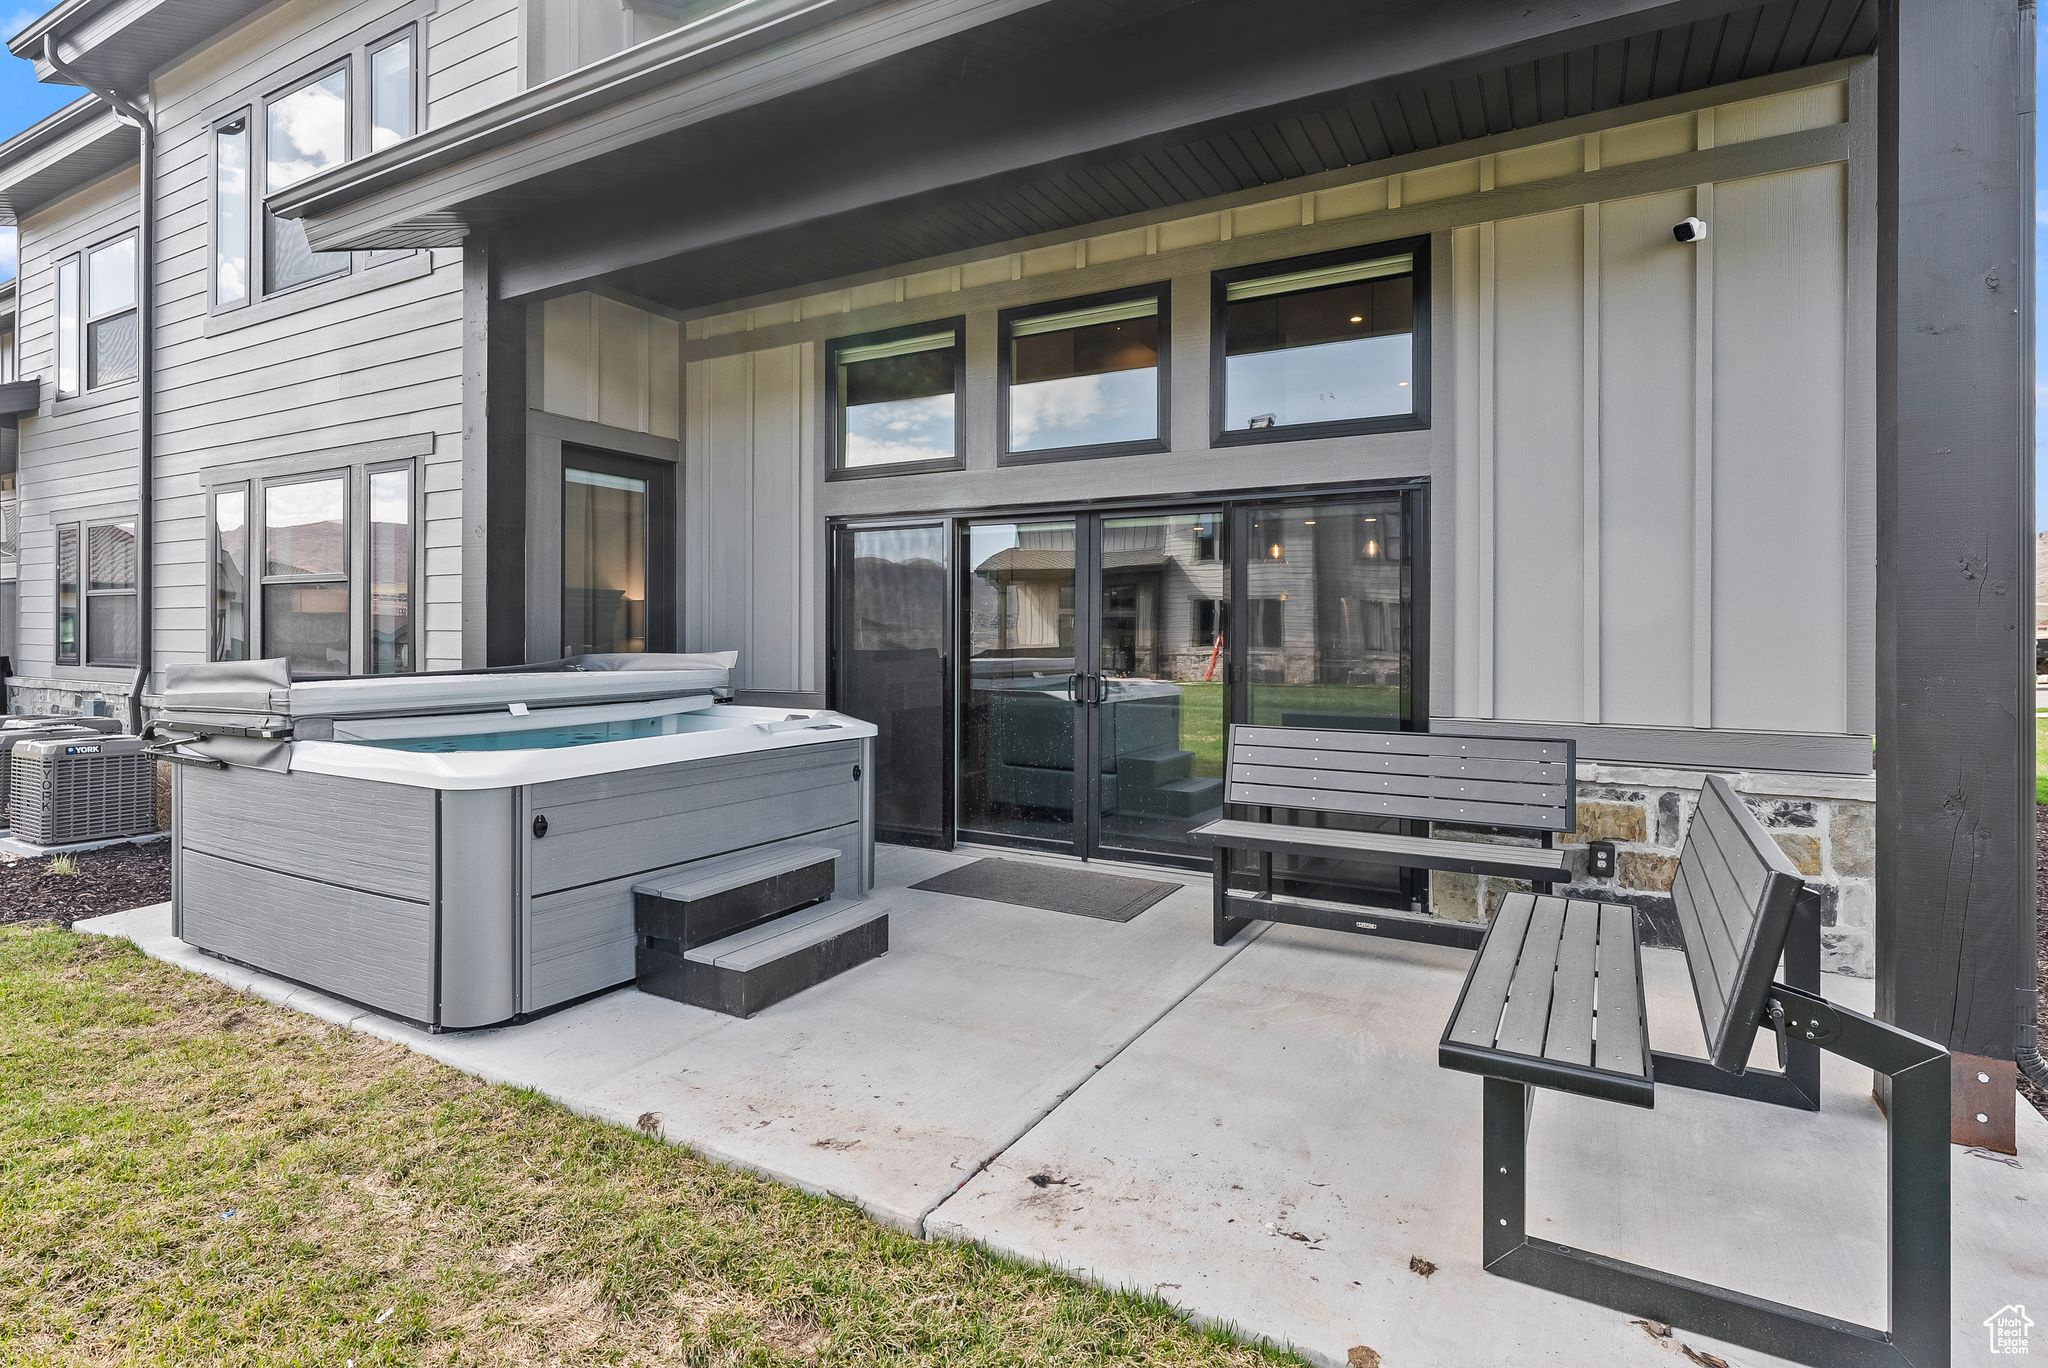 View of patio with a hot tub and central air condition unit